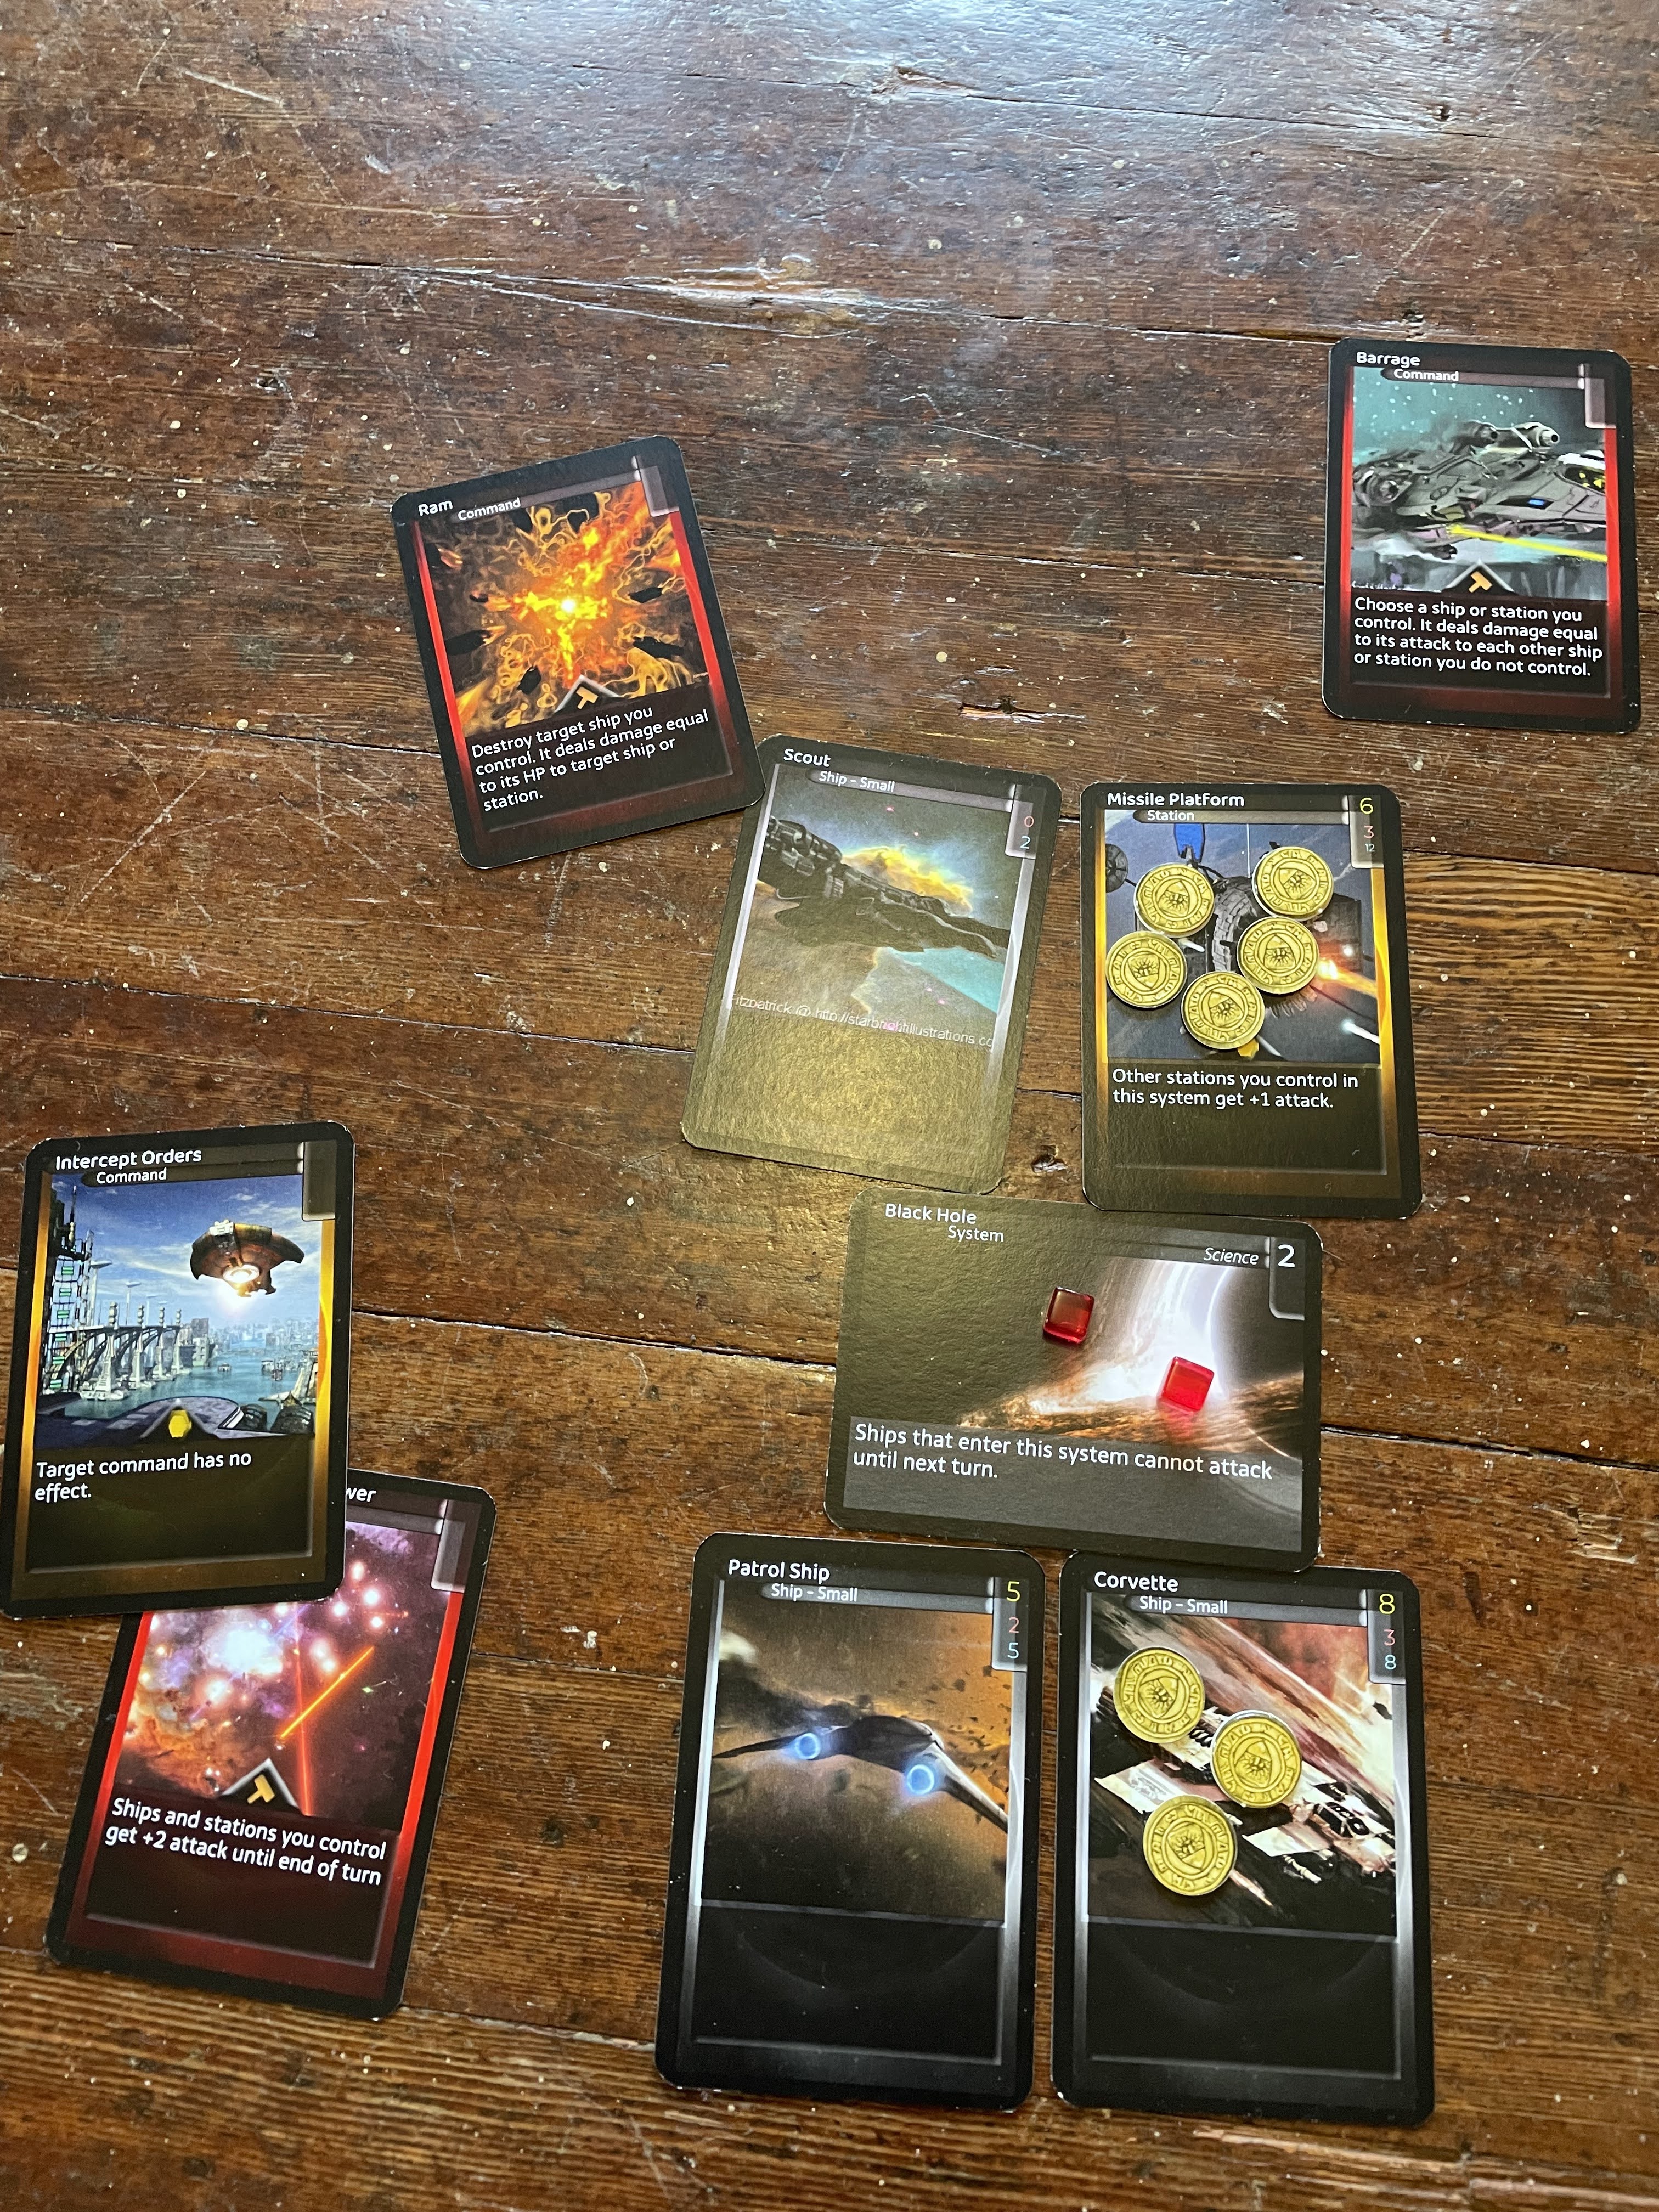 The four ship card involved in combat, plus a number of command cards placed around them to highlight what is going on. Damage counters are placed on one of the cards.